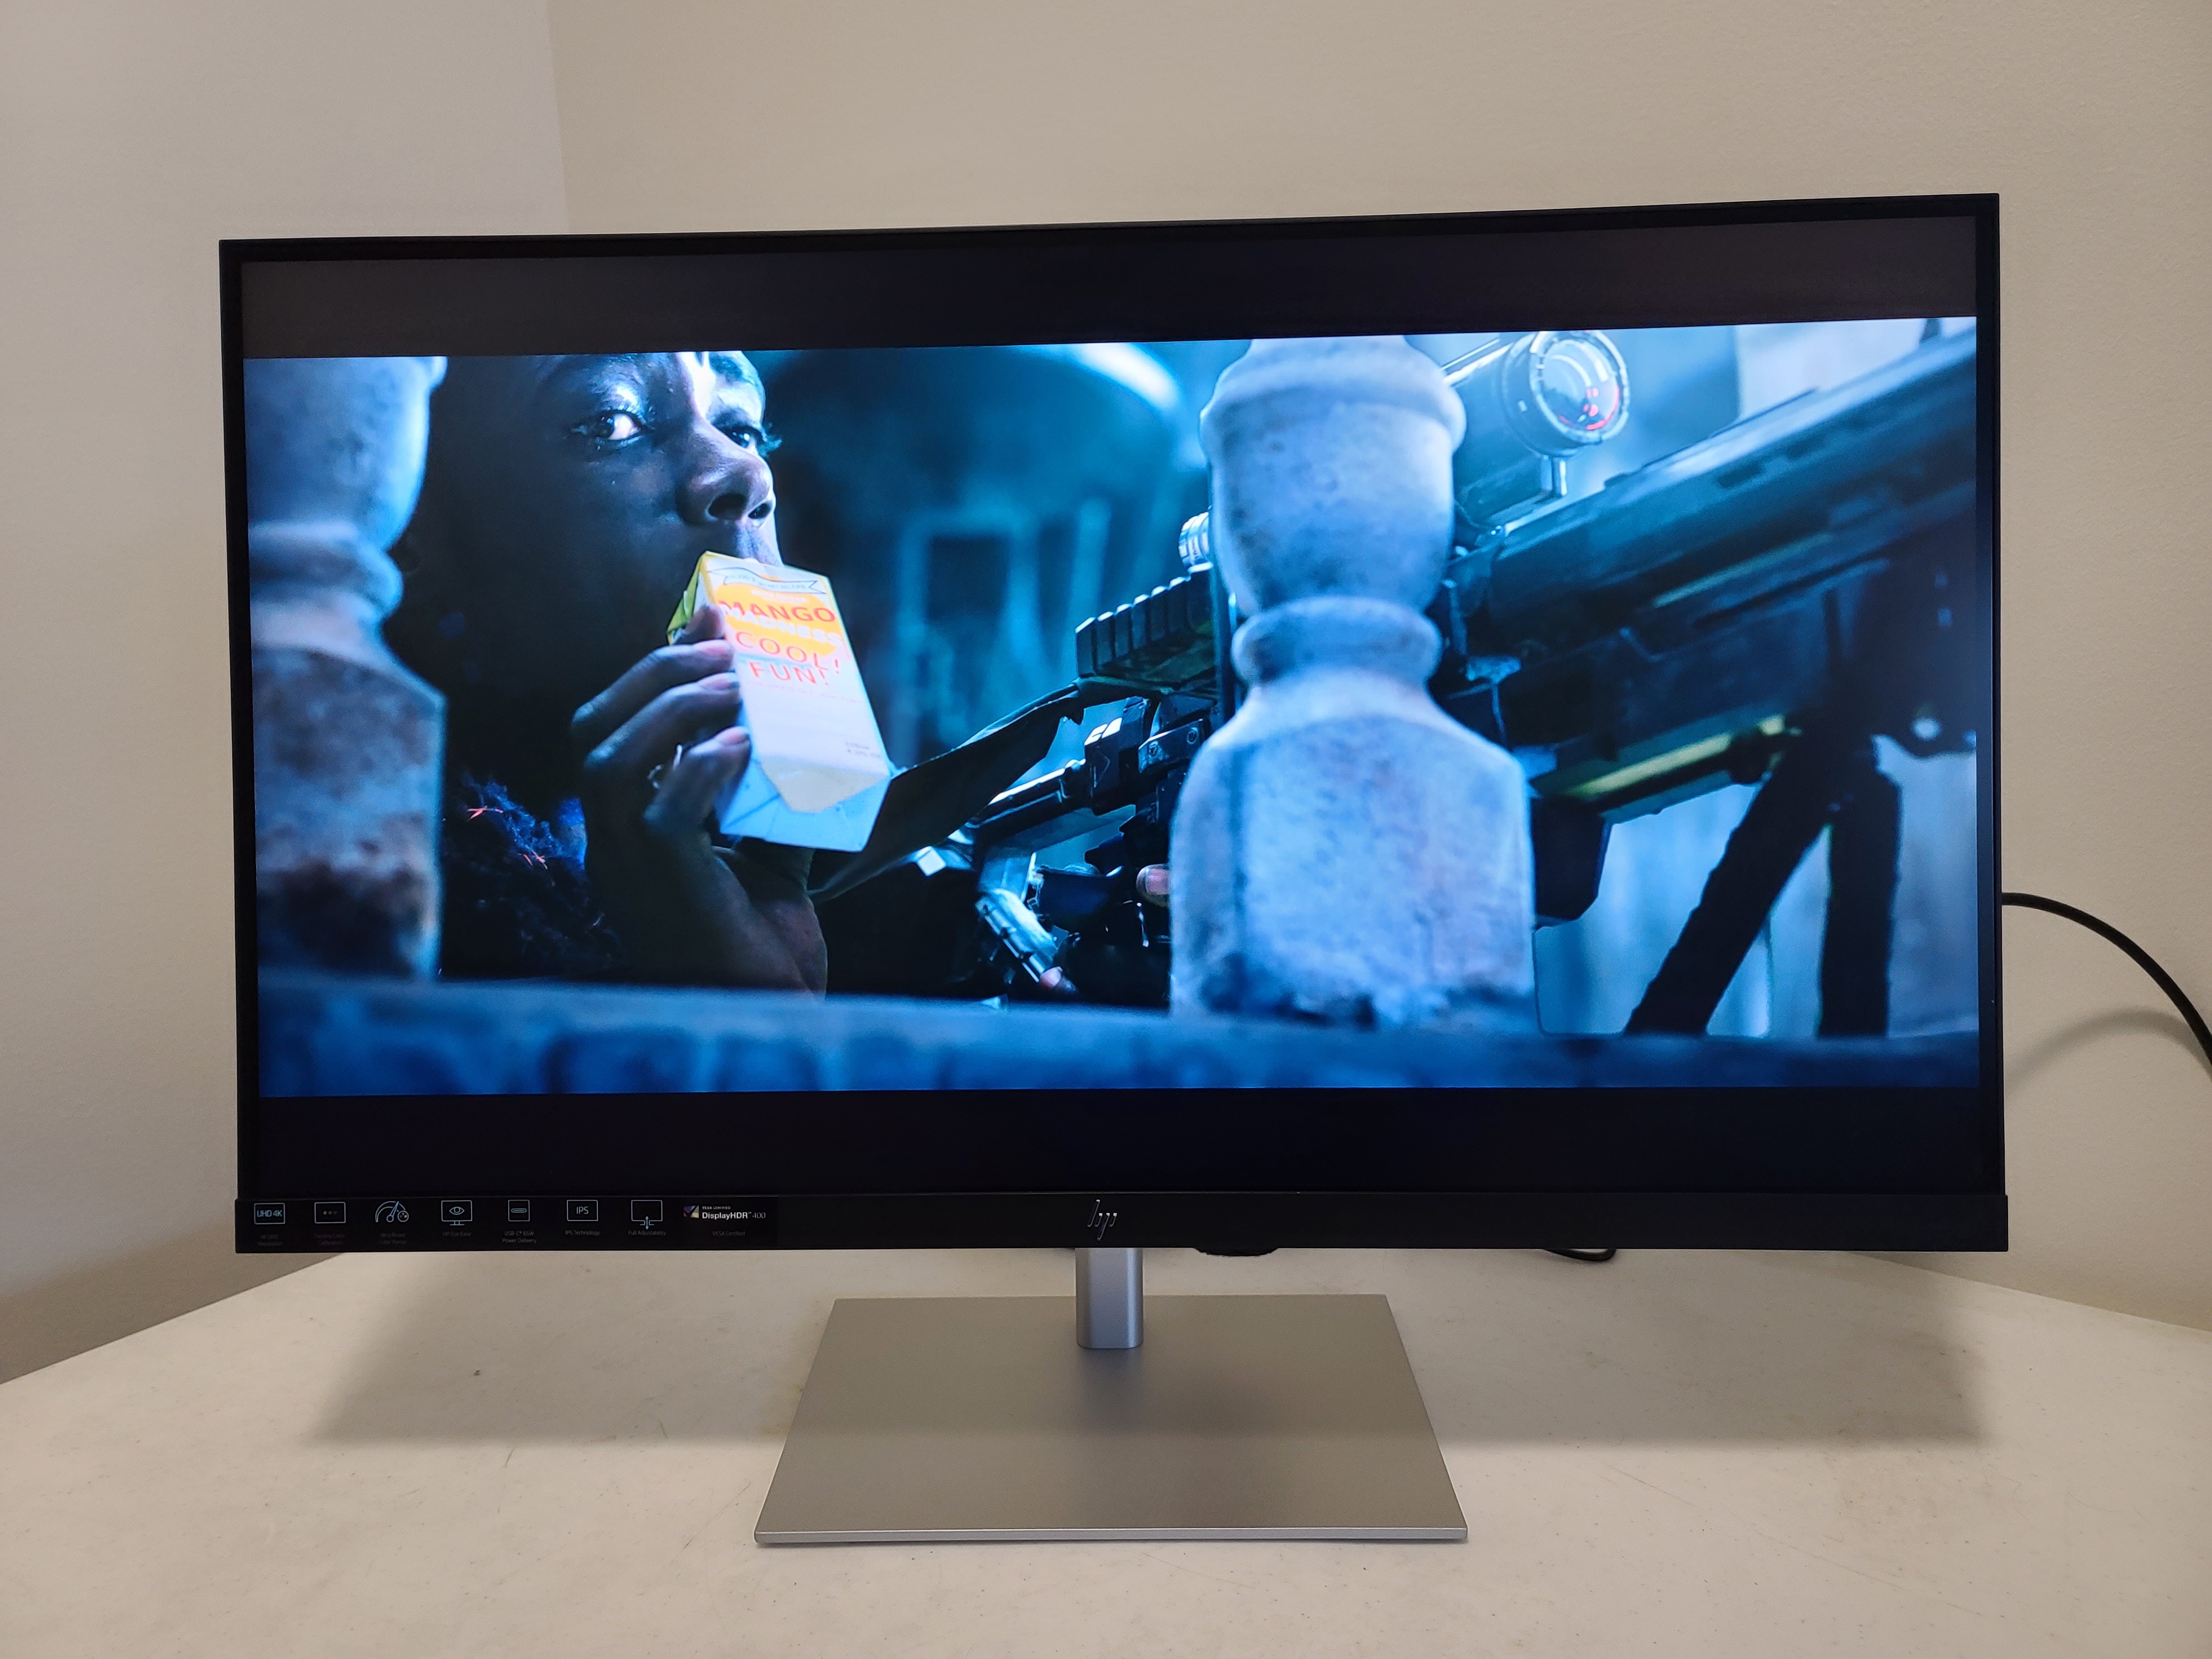 HP U28 4K HDR Monitor Review: Color You Can Count On | Tom's Hardware